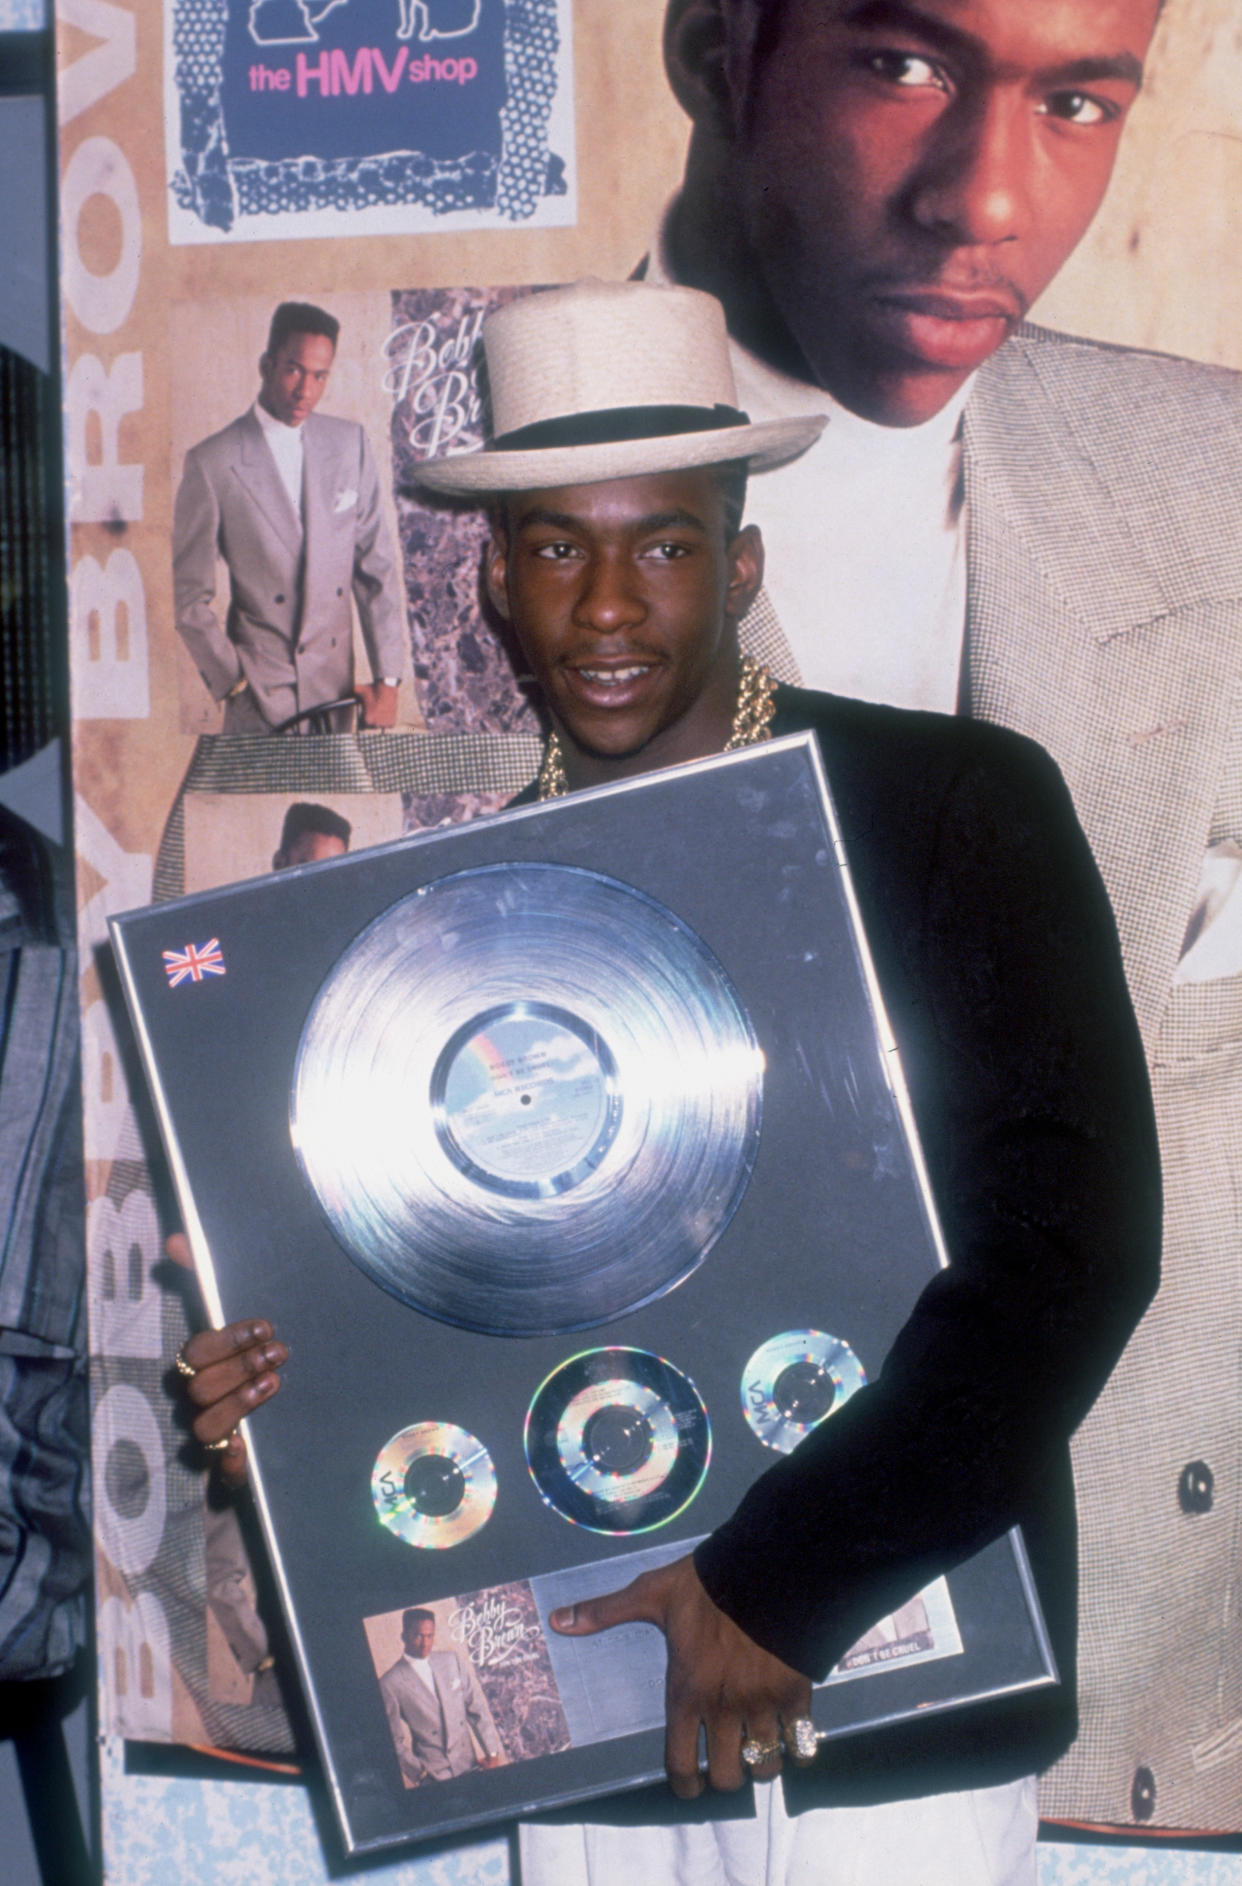 American R&B singer Bobby Brown holding a copy of his album 'Don't Be Cruel', at the HMV shop, circa 1988. (Photo by Dave Hogan/Hulton Archive/Getty Images)